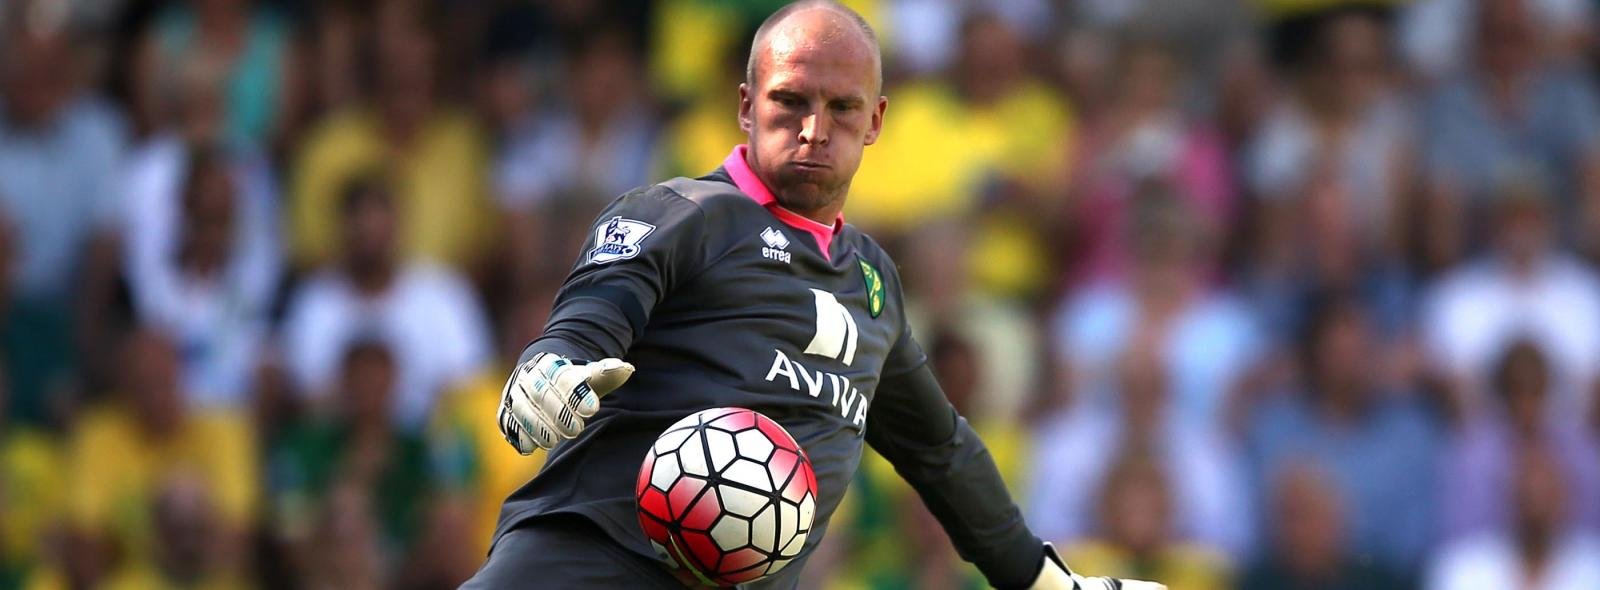 Norwich City fans are wrong to bash two of their “good guys”